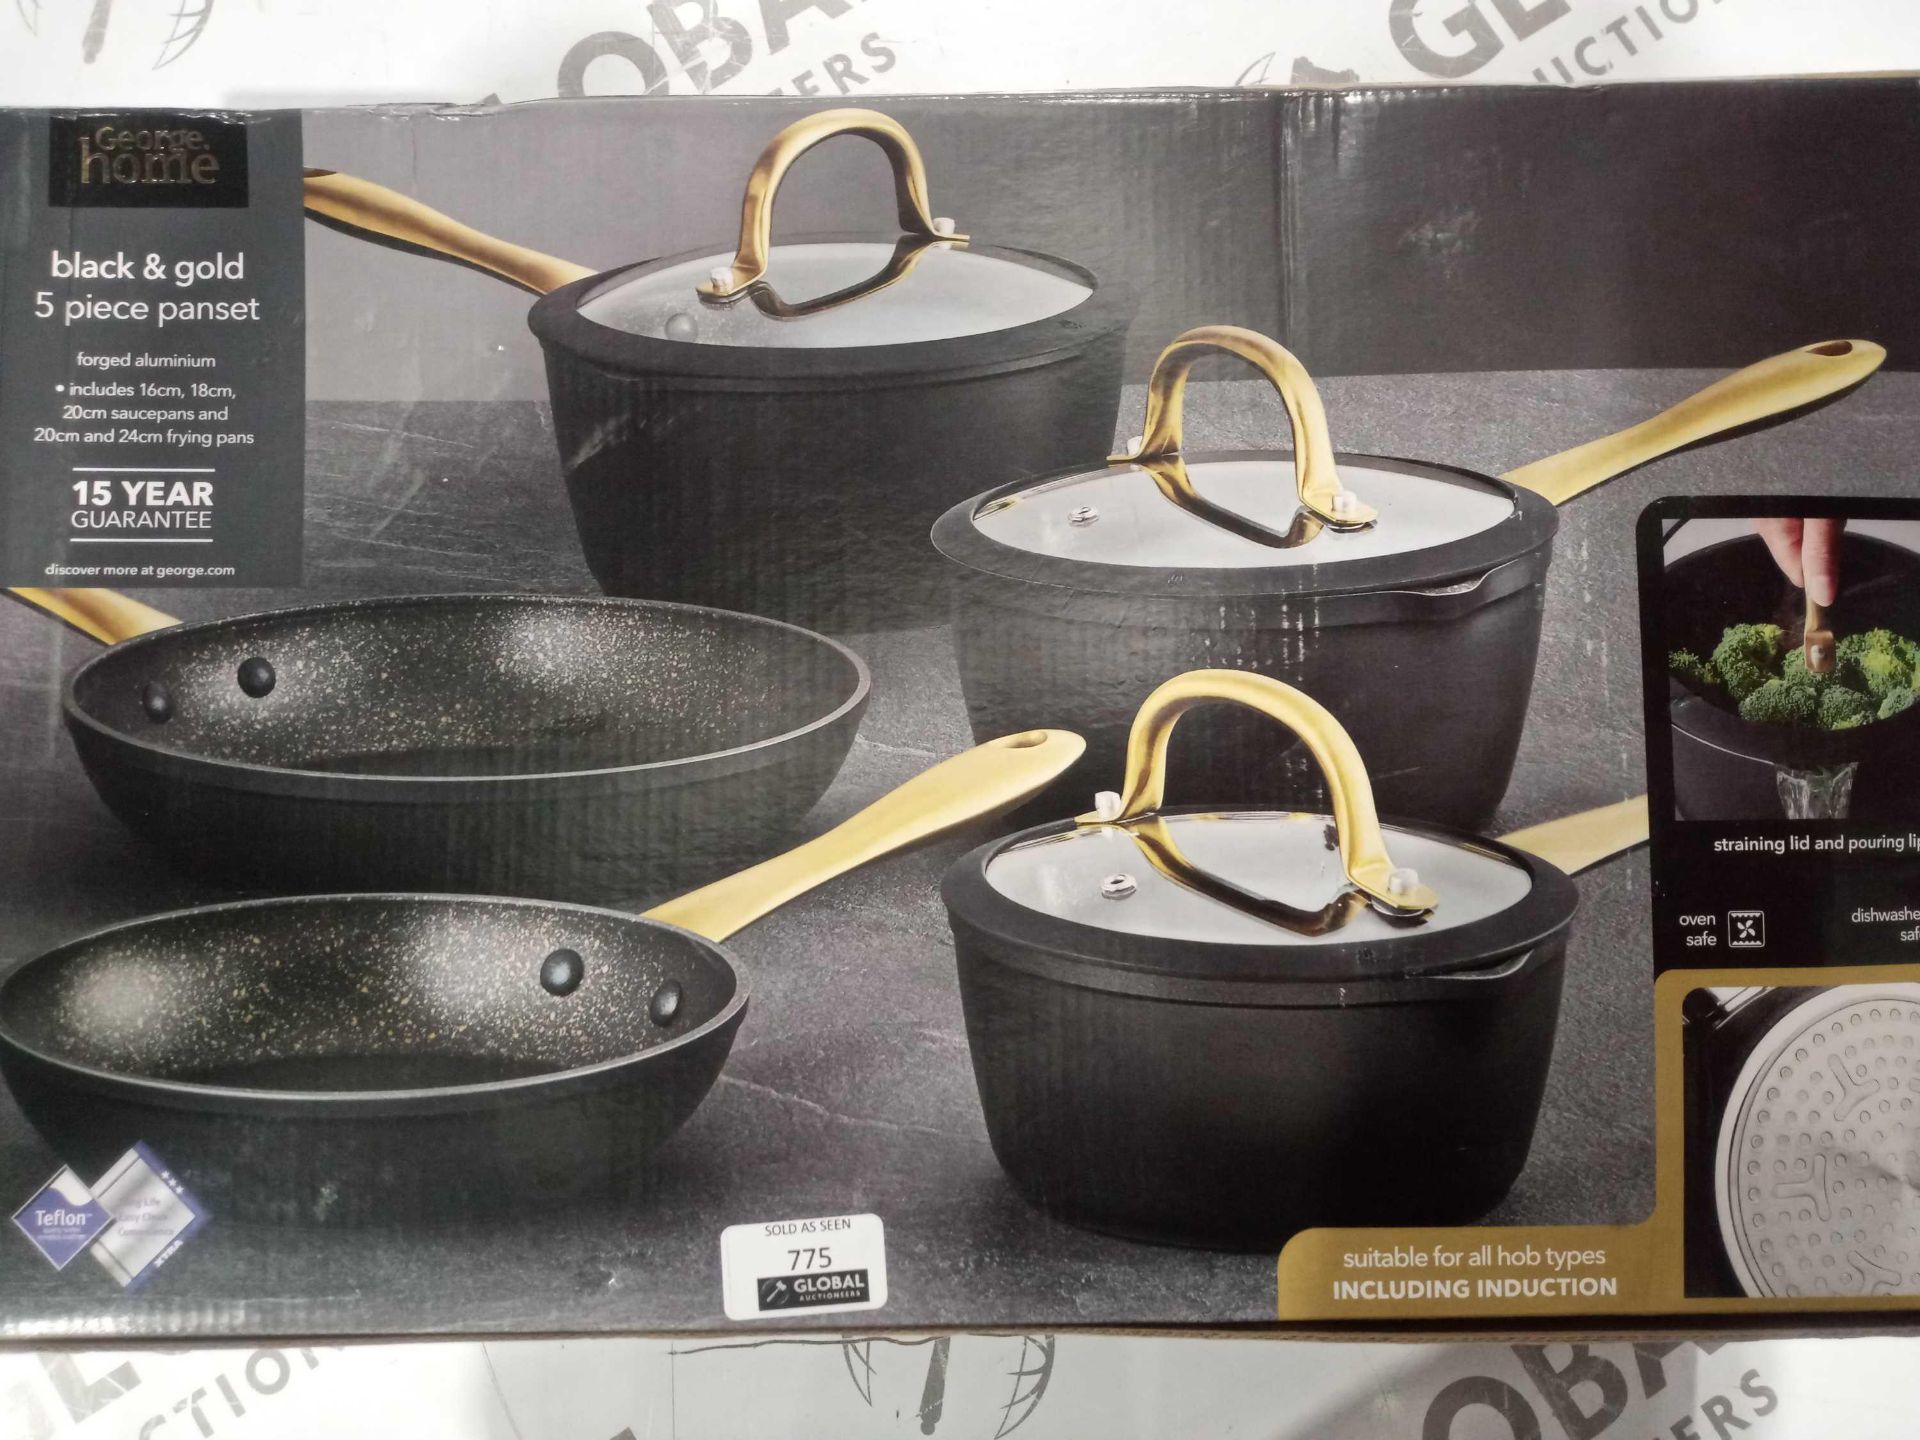 Boxed black and gold 5-piece pan set